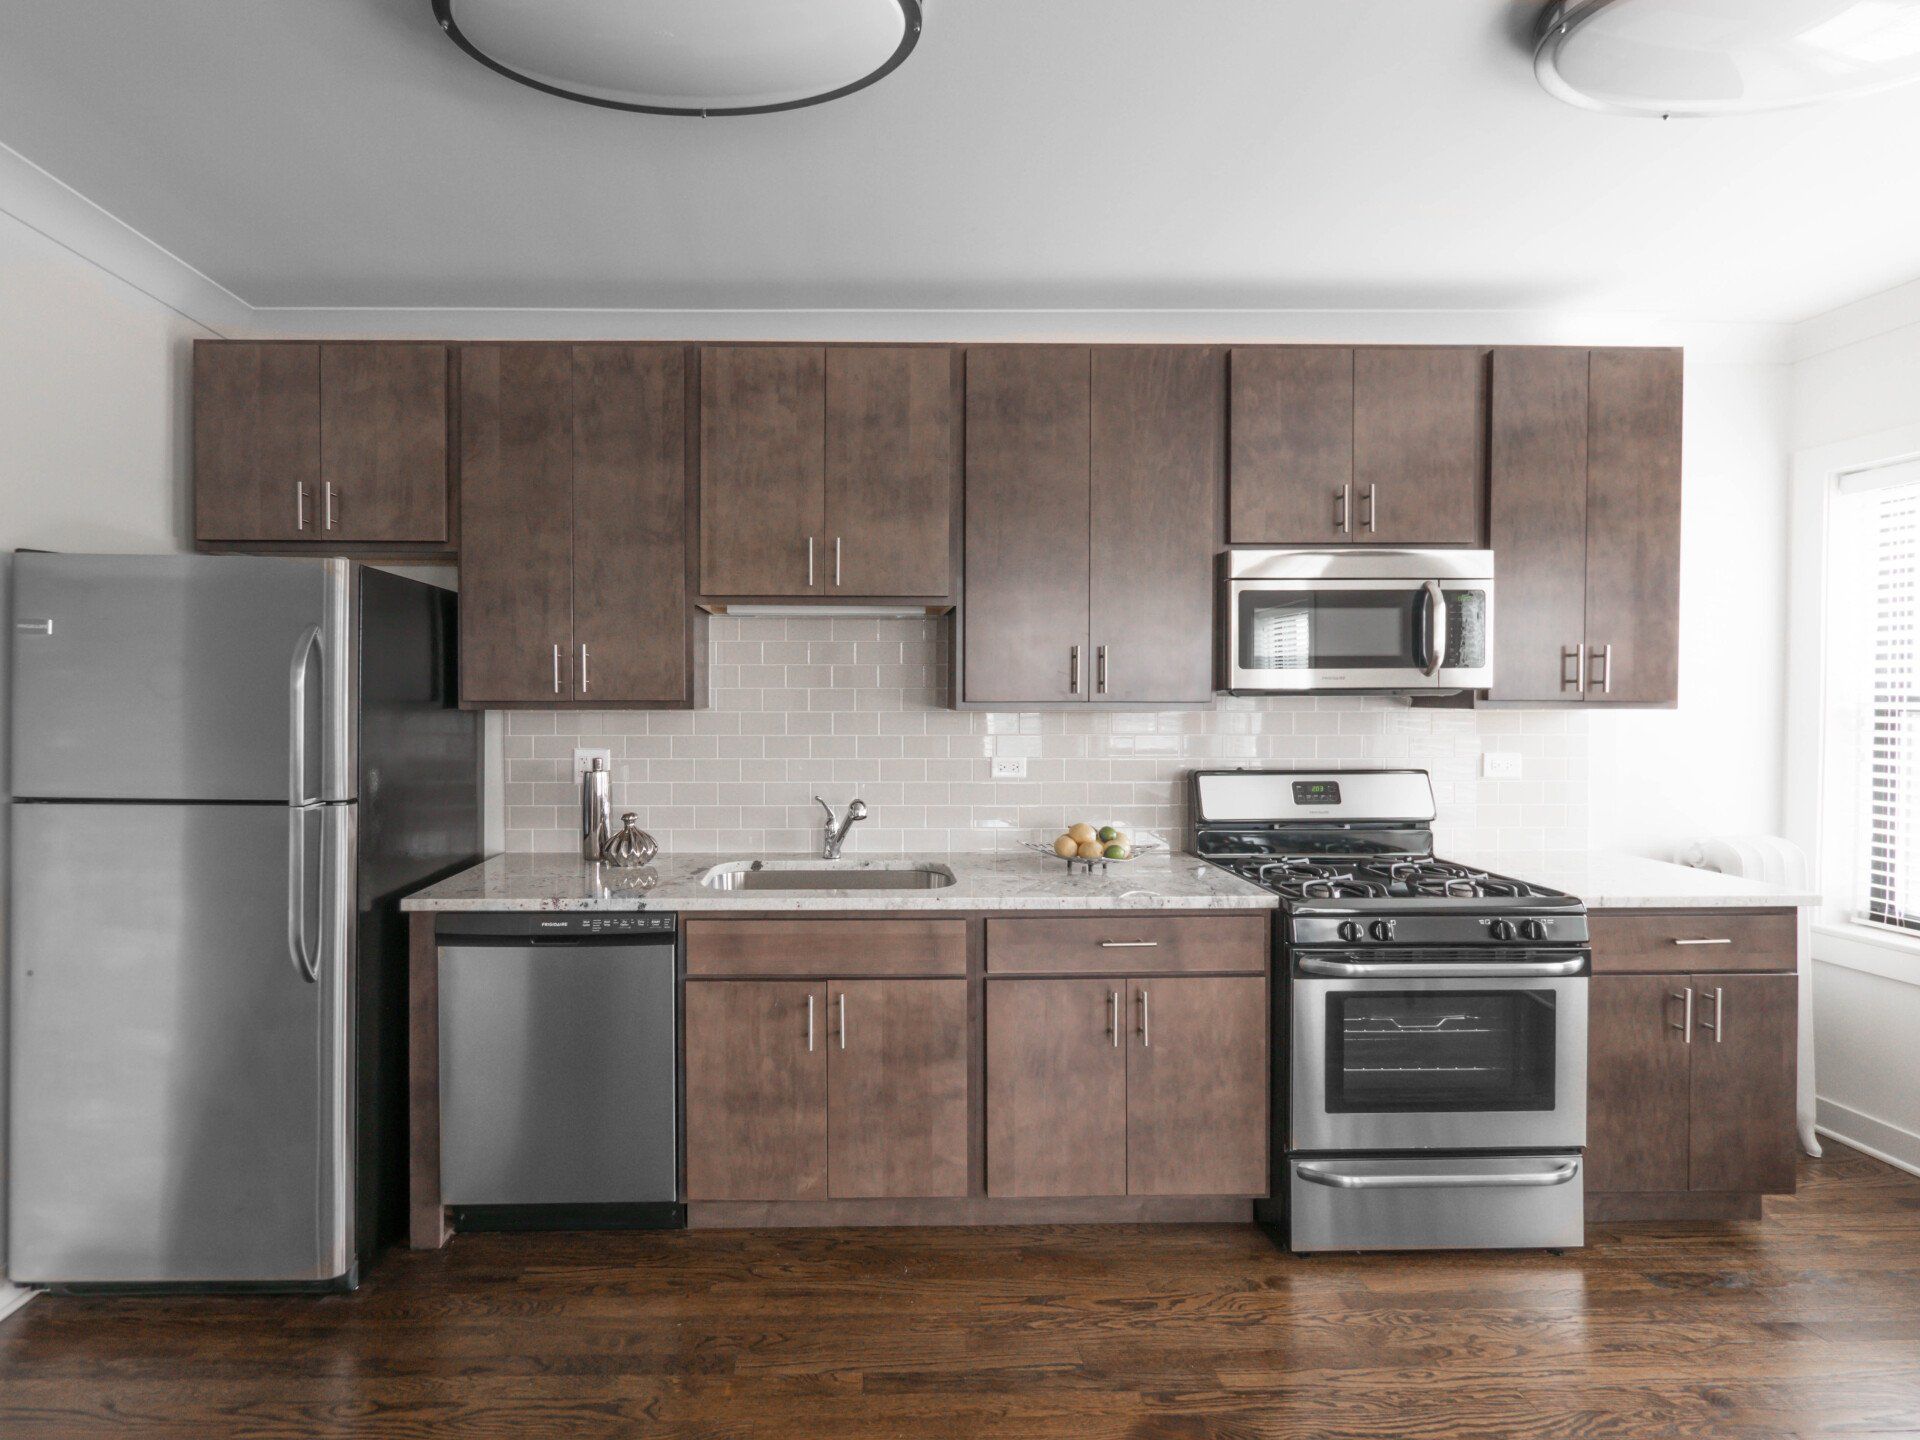 Apartment kitchen with stainless steel appliances and wooden cabinets at 5425 N Clark Street.